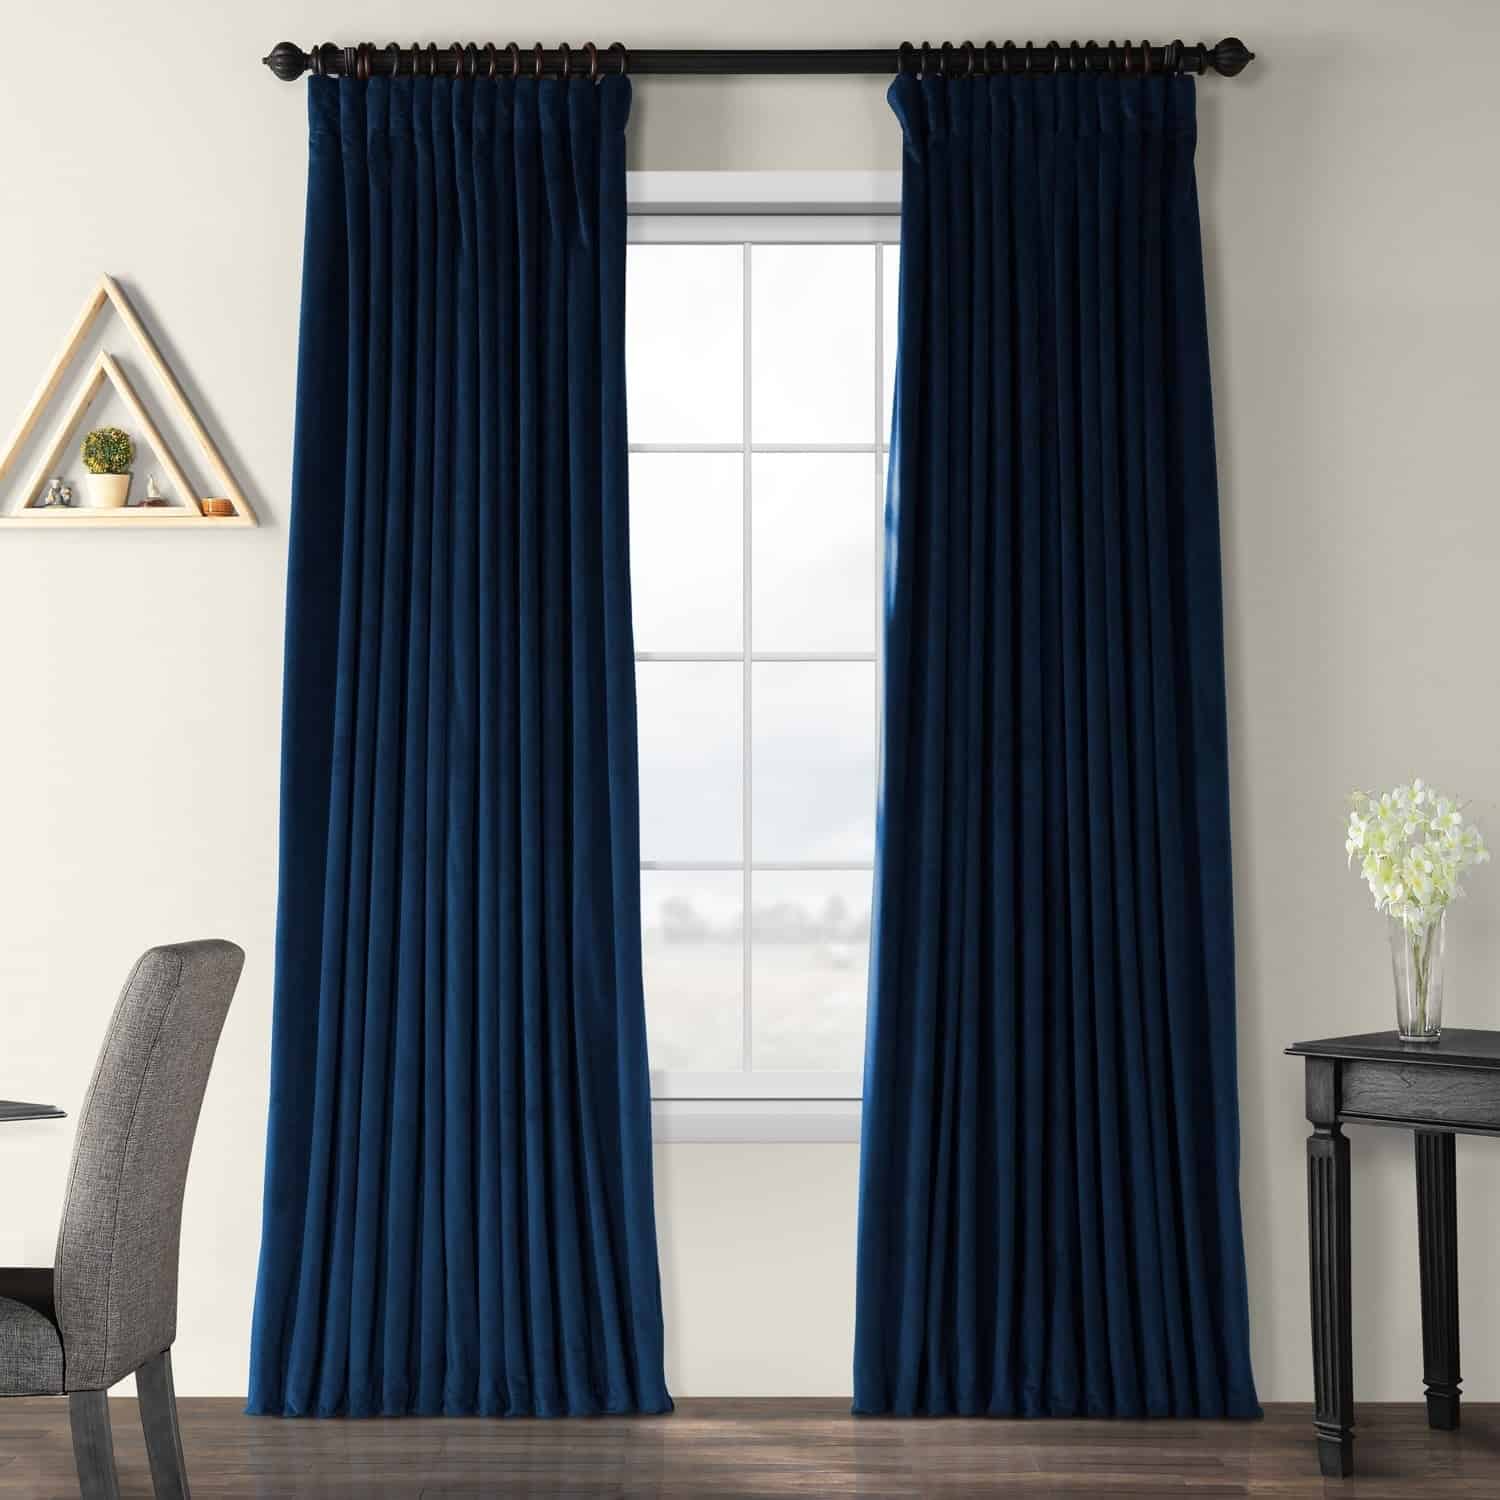 Navy Blue Curtains Match So Well With White Walls